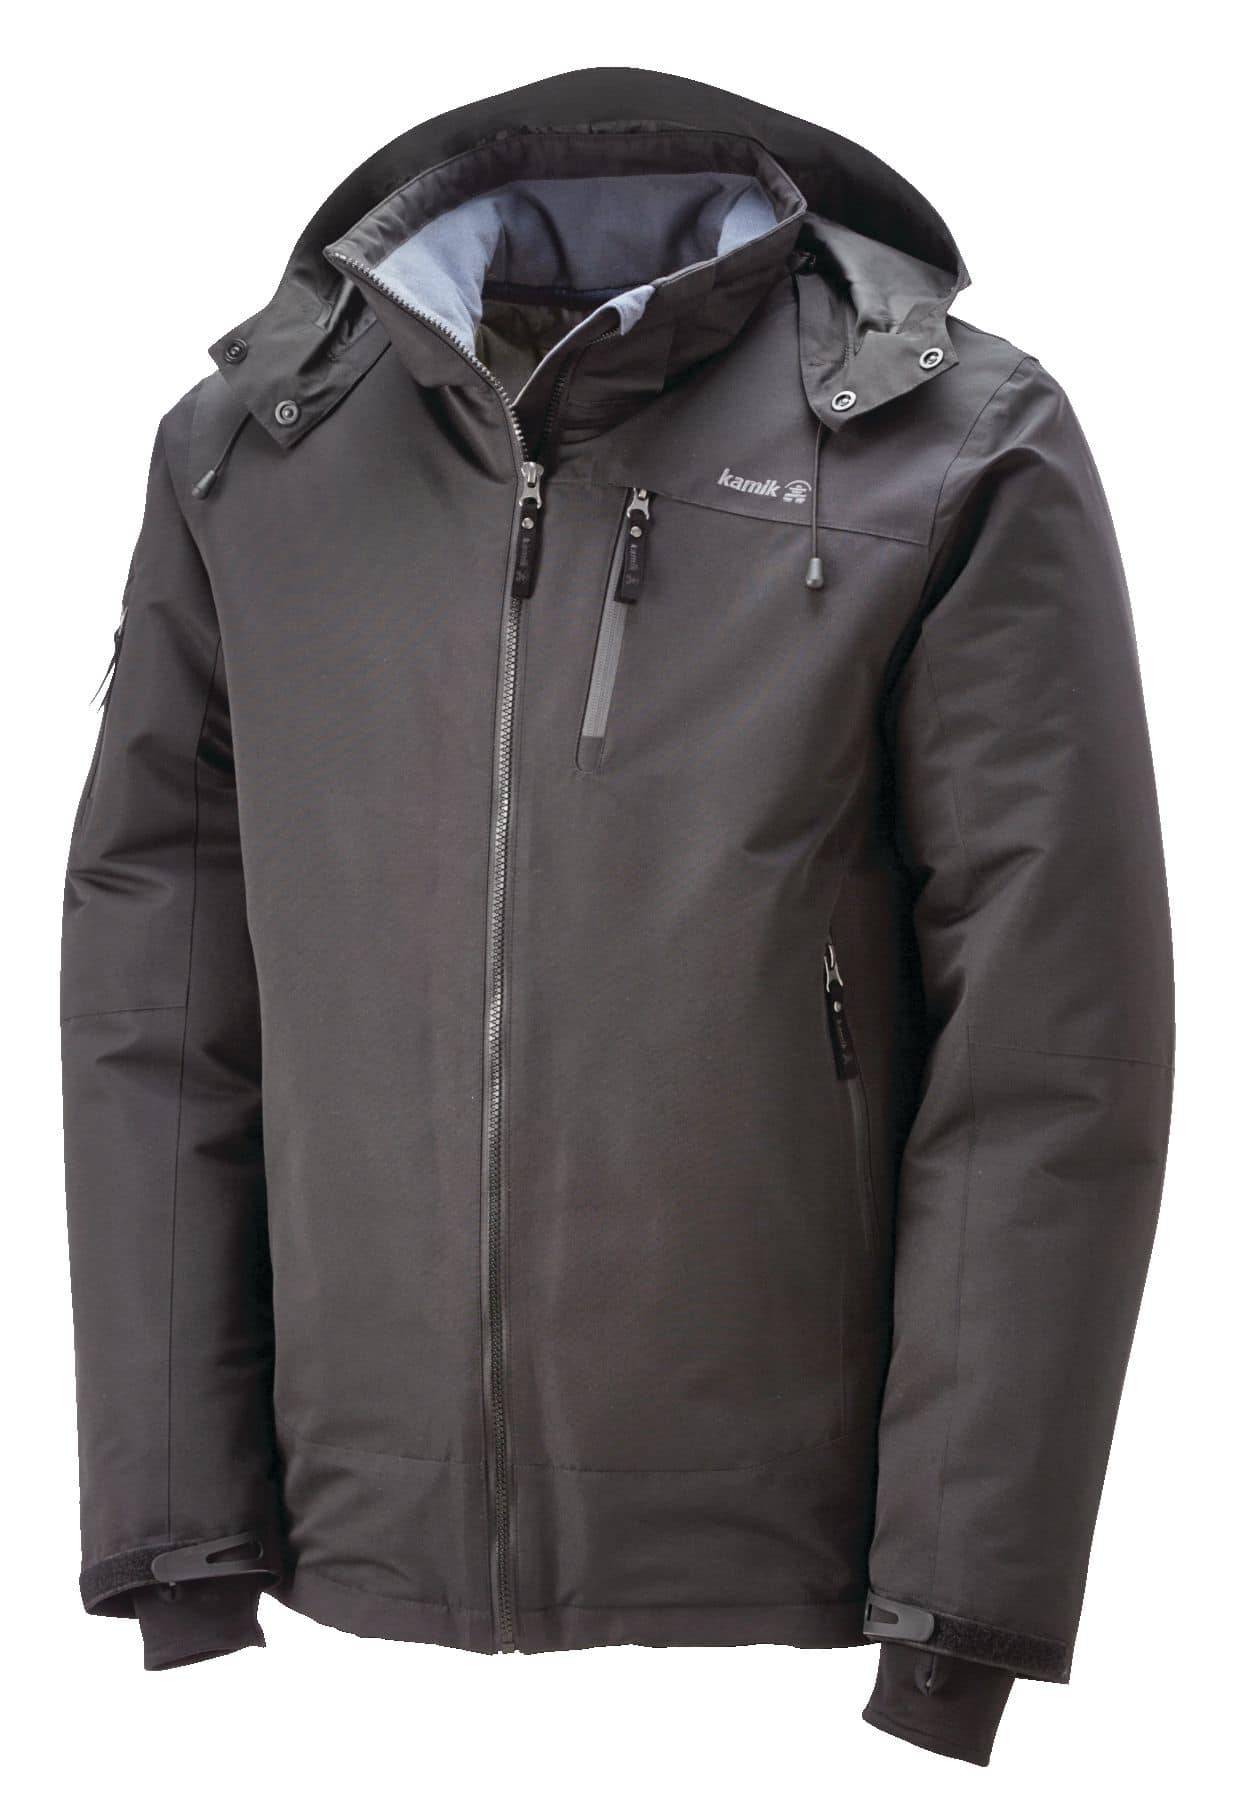   Essentials Men's Water-Resistant Softshell Jacket,  Black, X-Small : Clothing, Shoes & Jewelry